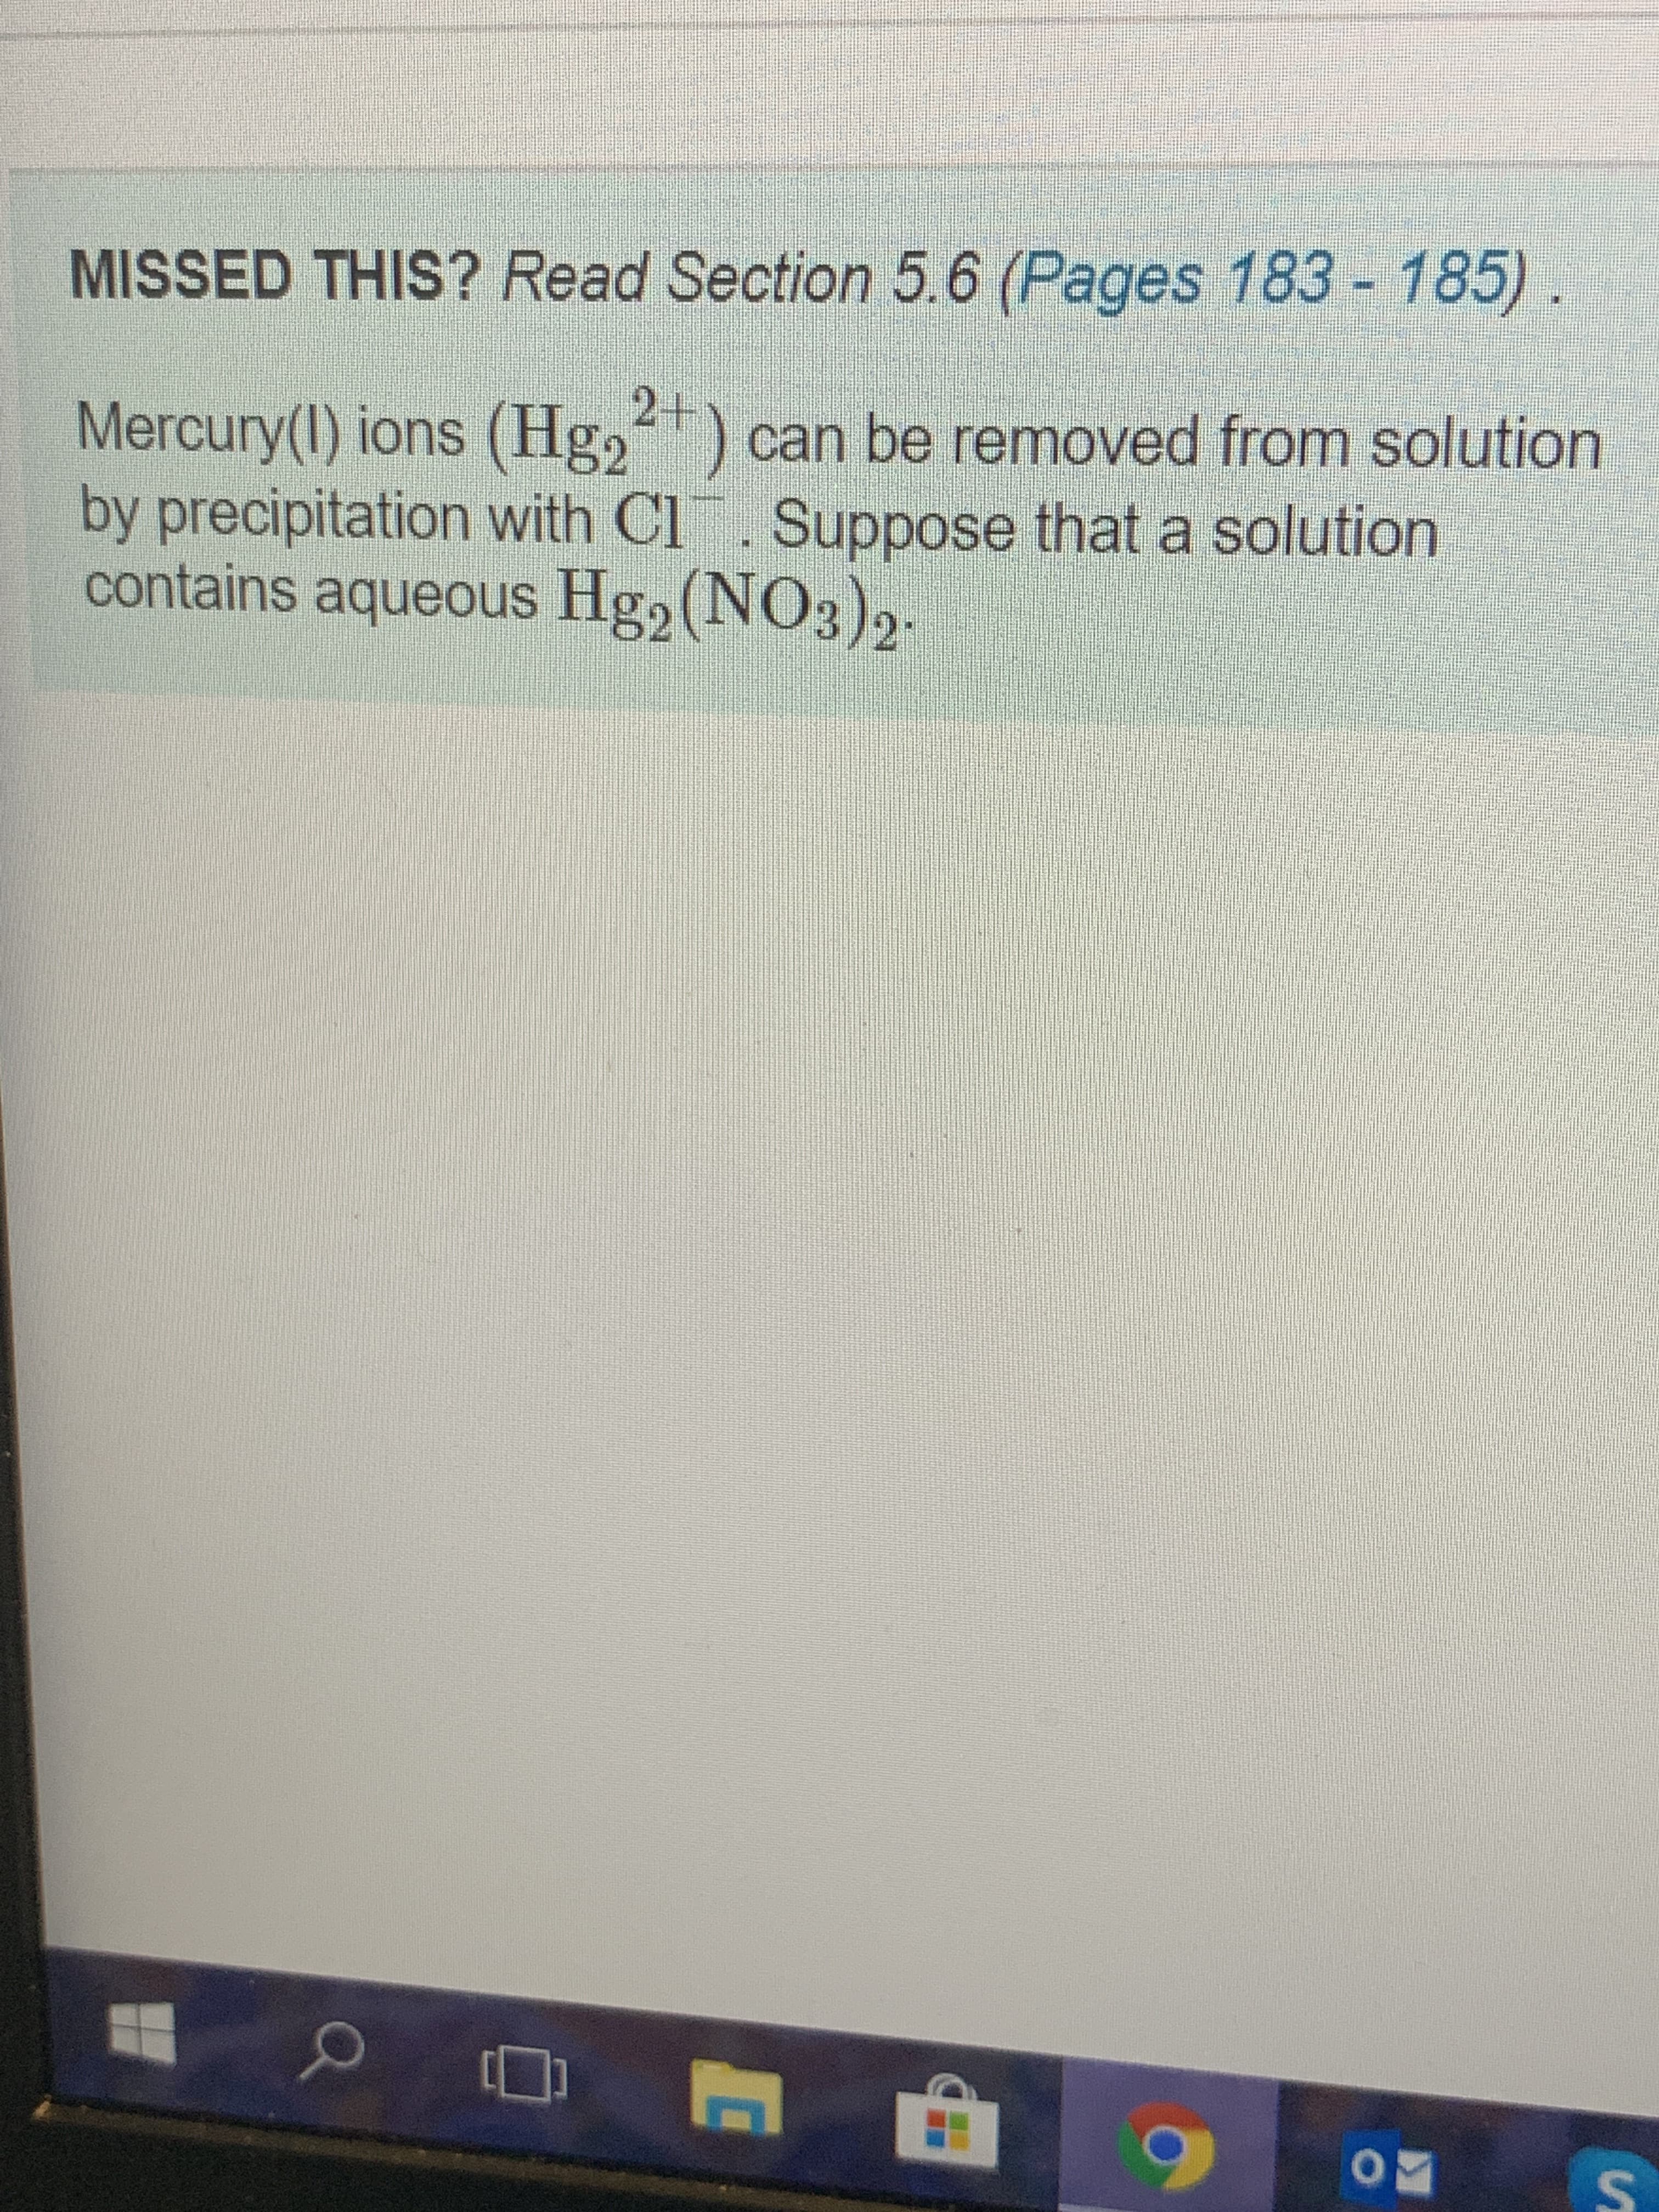 MISSED THIS? Read Section 5.6 (Pages 183- 185) .
Mercury(I) ions (Hg,) can be removed from solution
by precipitation with Cl. Suppose that a solution
contains aqueous Hg2(NO3)2
2+
:
